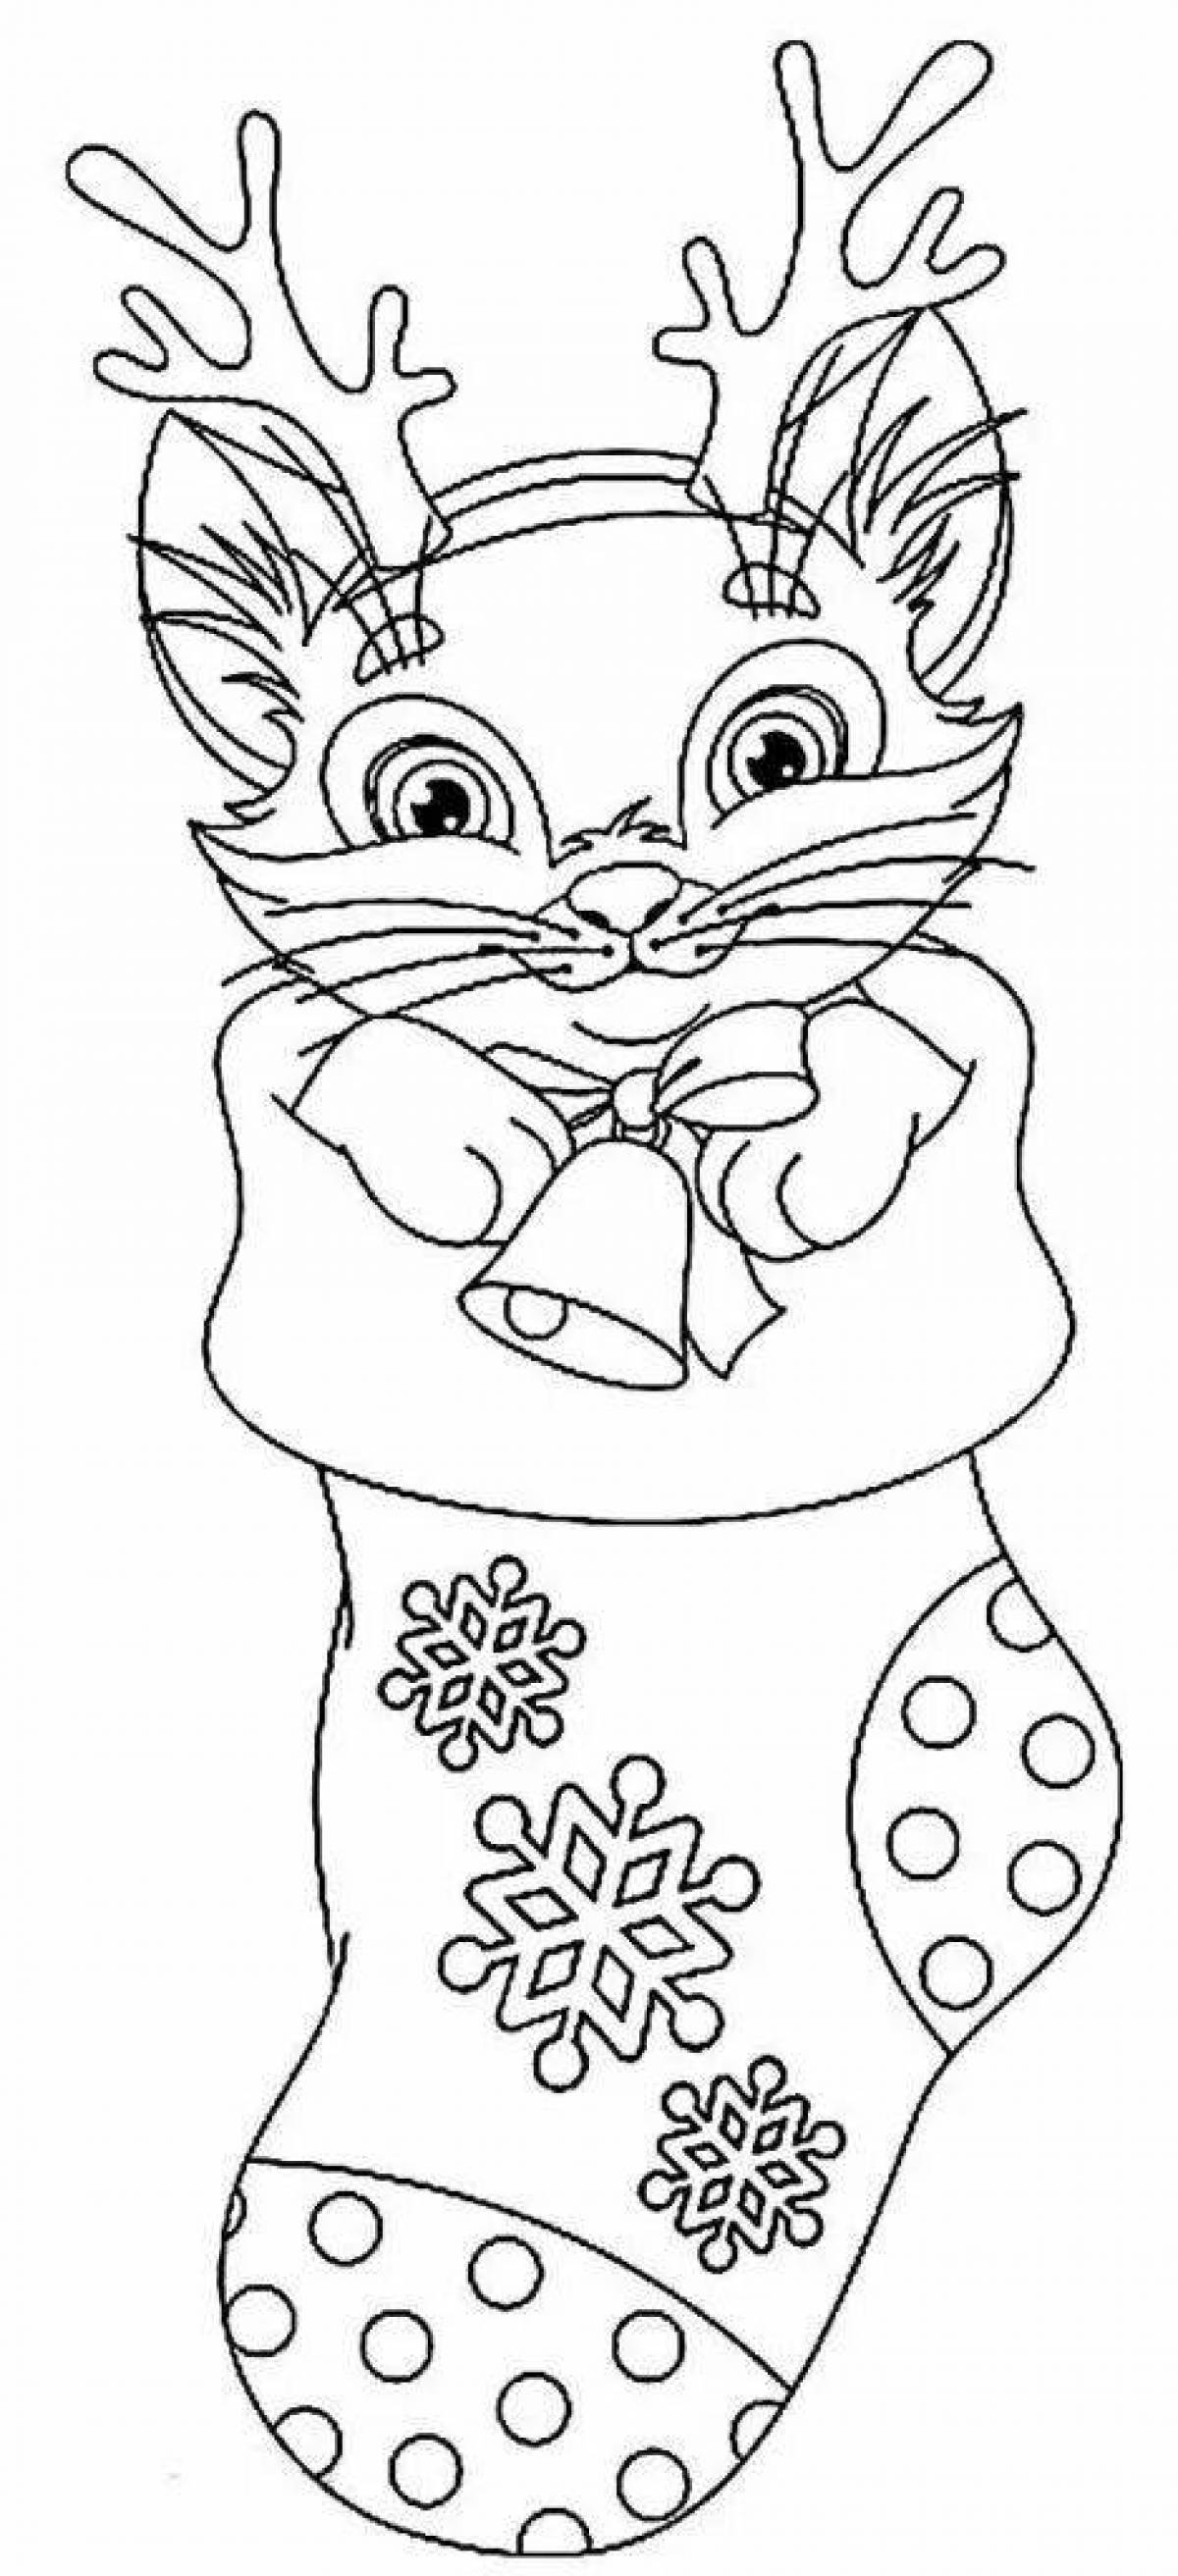 Cute kitty christmas coloring book